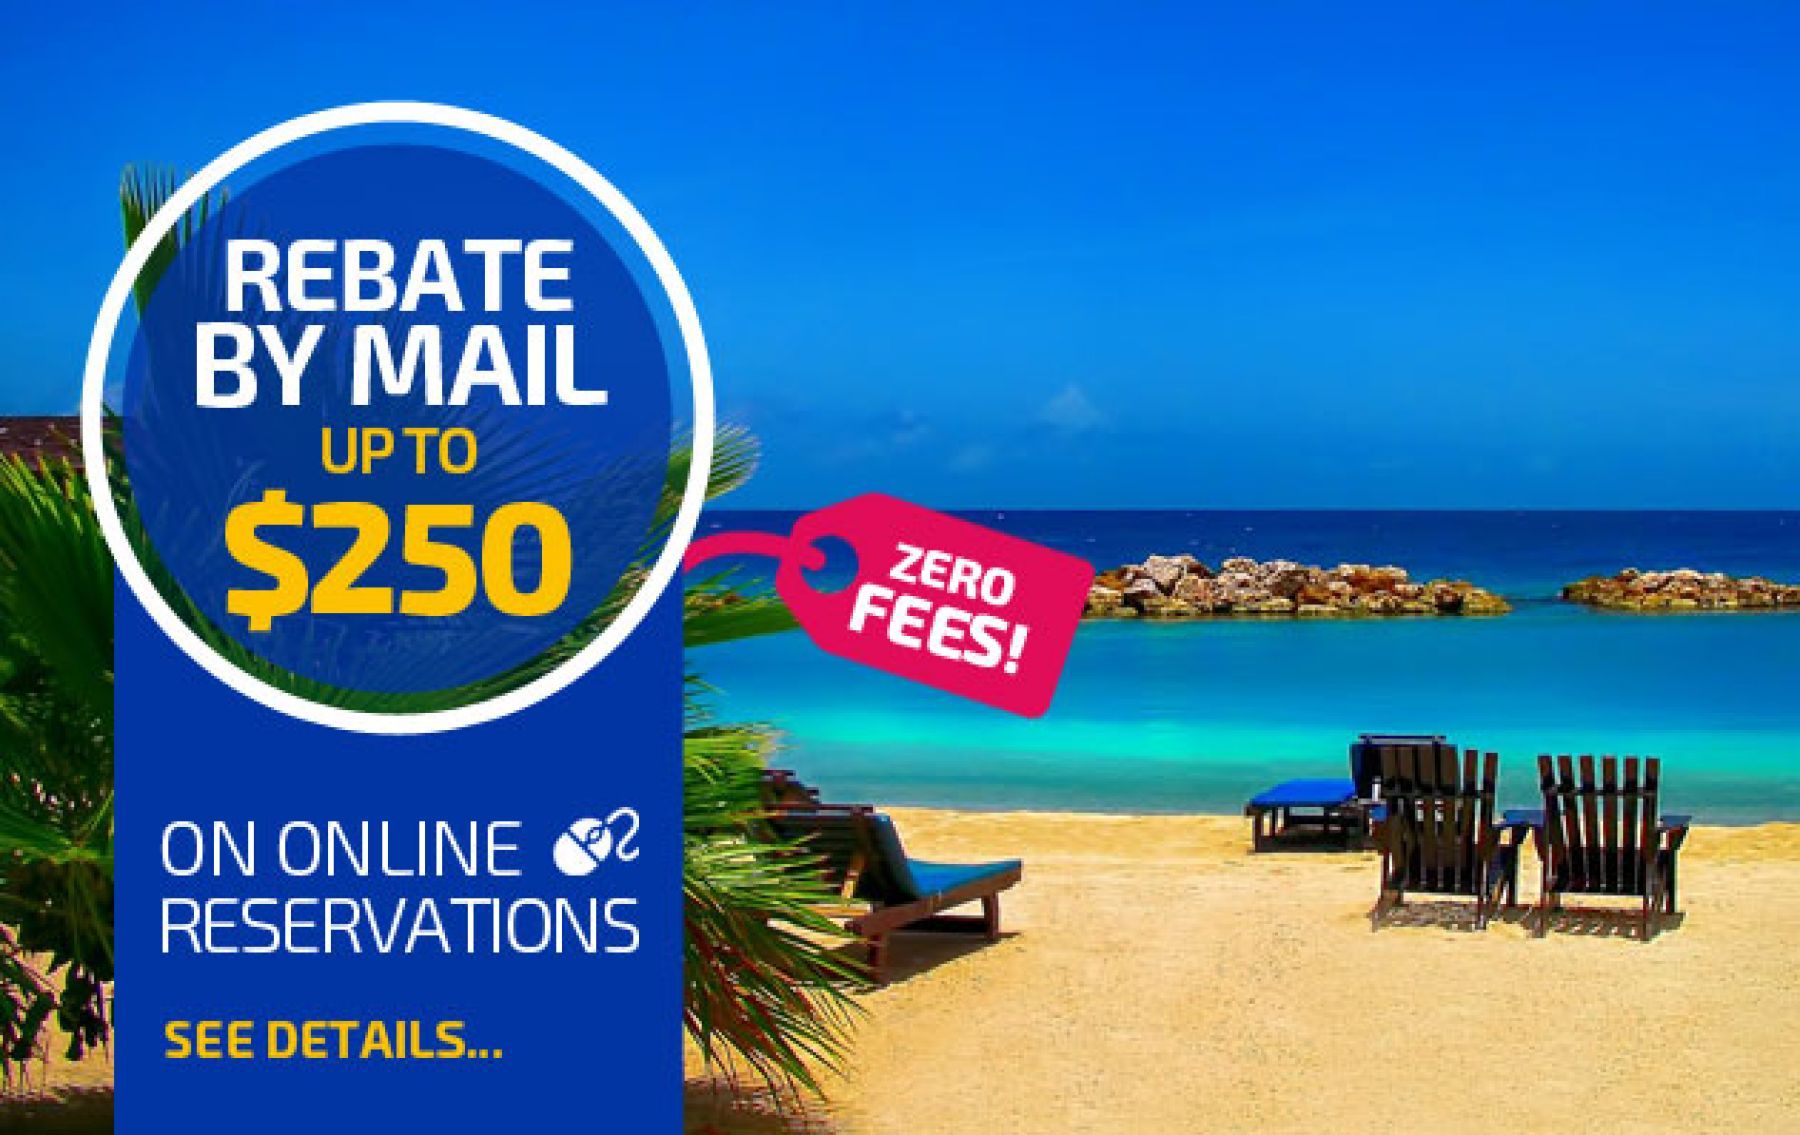 rebate-by-mail-up-to-250-voyages-destination